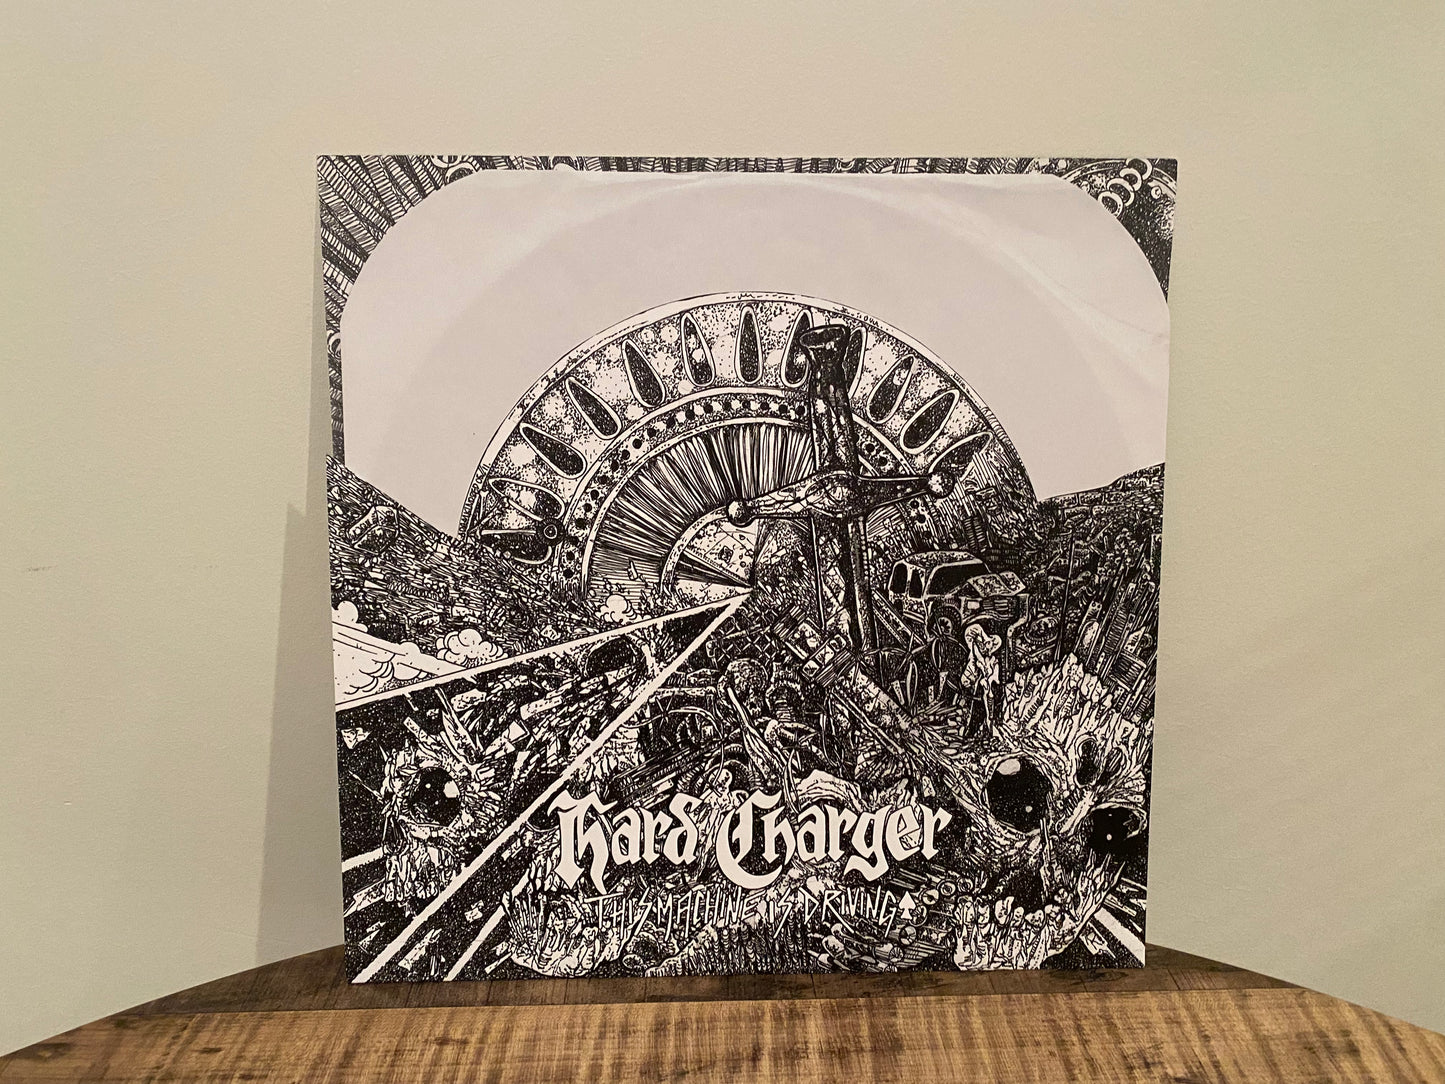 Hard Charger - 'This Machine is Driving' LP